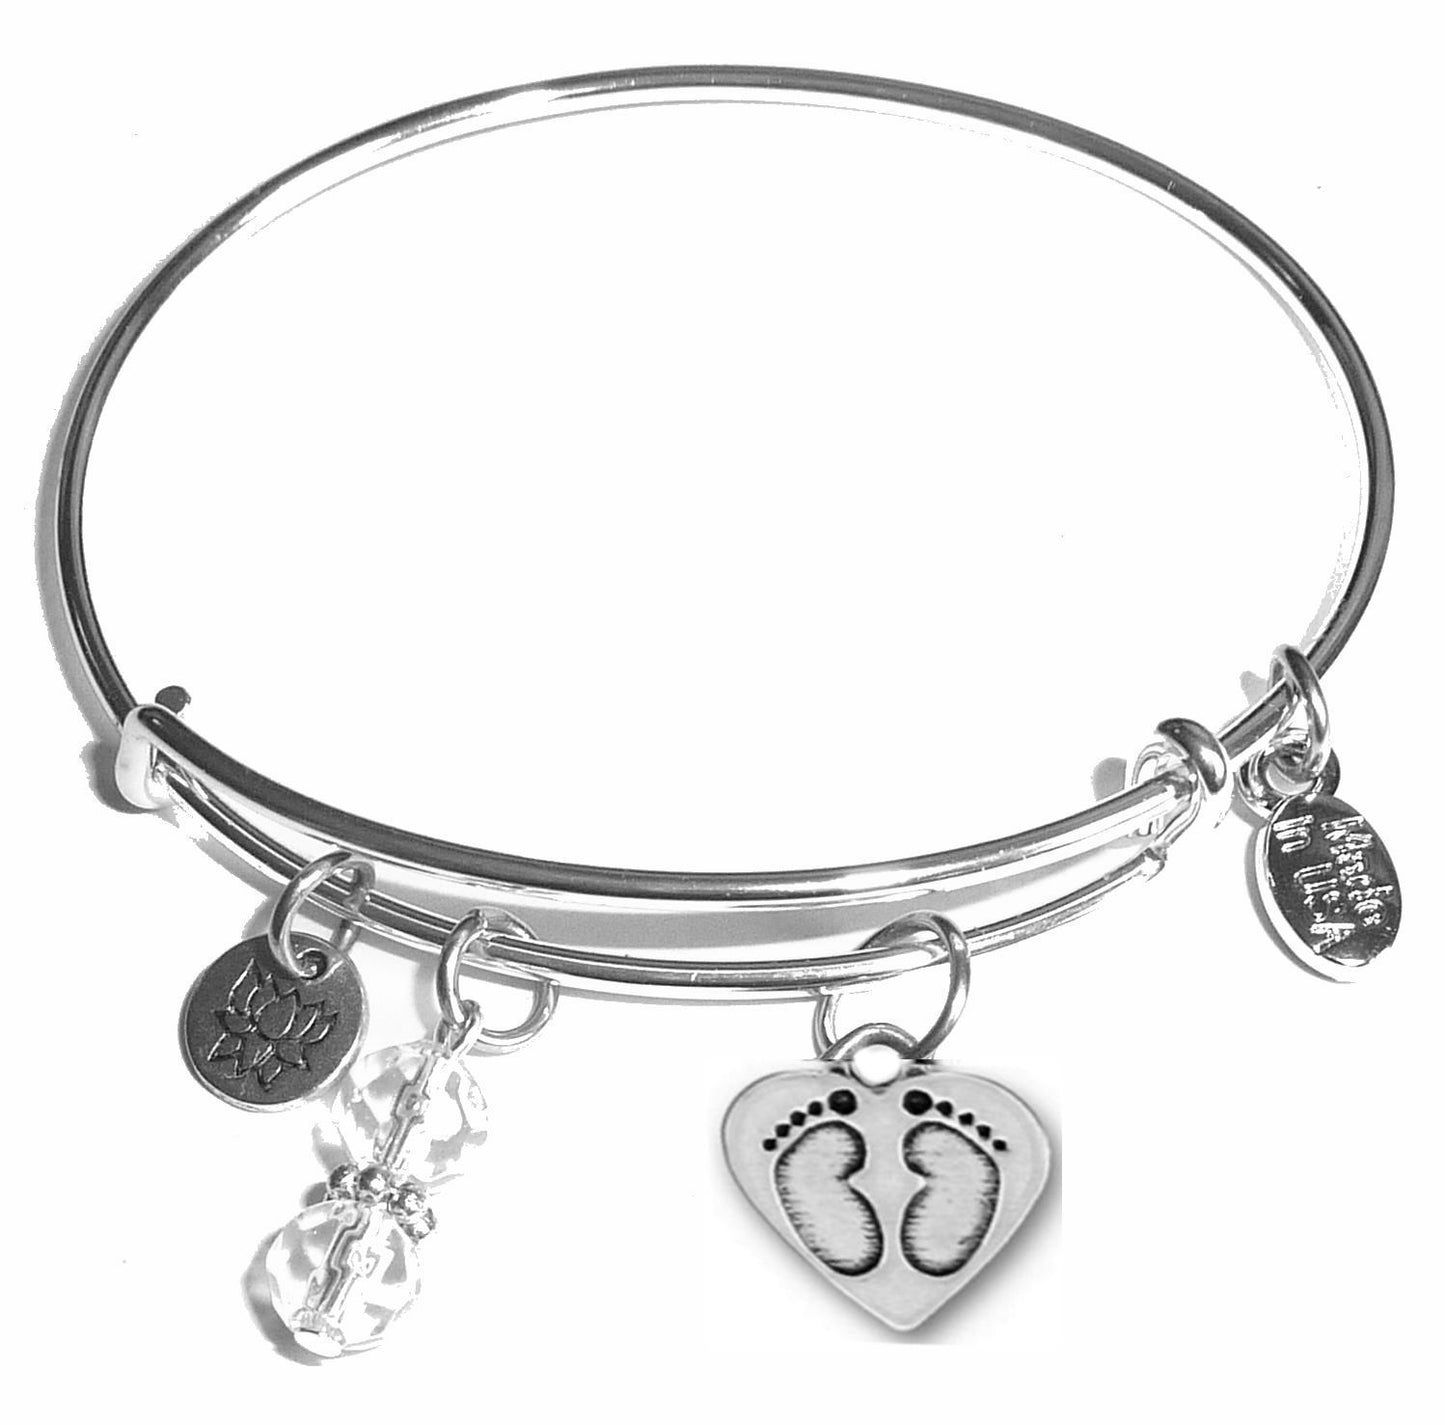 Baby Feet - Message Bangle Bracelet - Expandable Wire Bracelet– Comes in a gift box